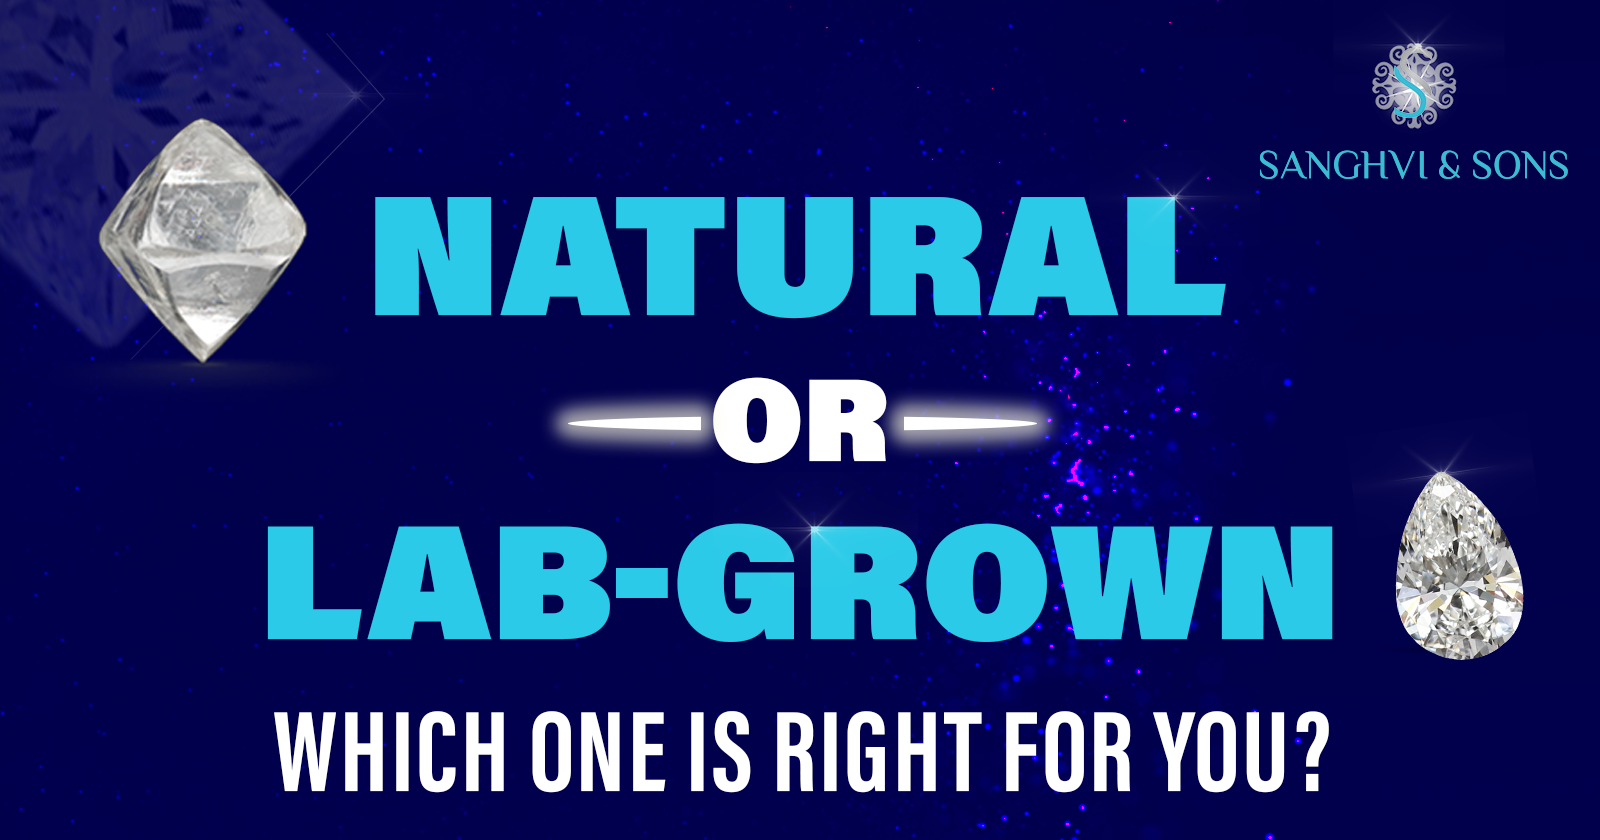 natural-or-lab-grown-which-one-is-right-for-you